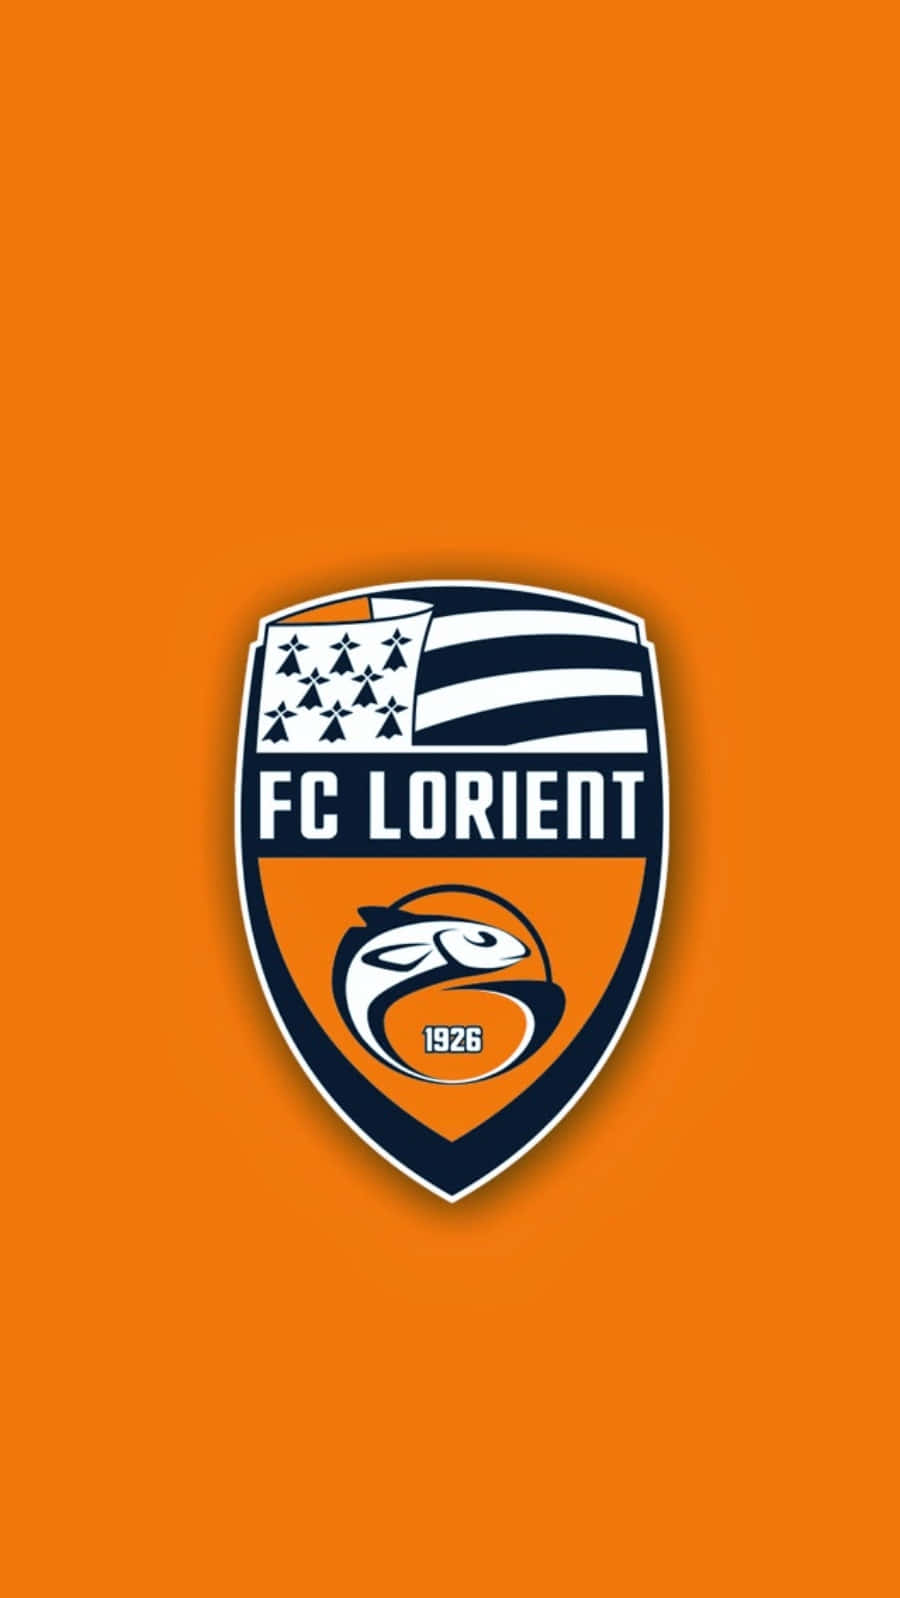 The Orange Wave, Fc Lorient Court In Action At A Football Game. Wallpaper